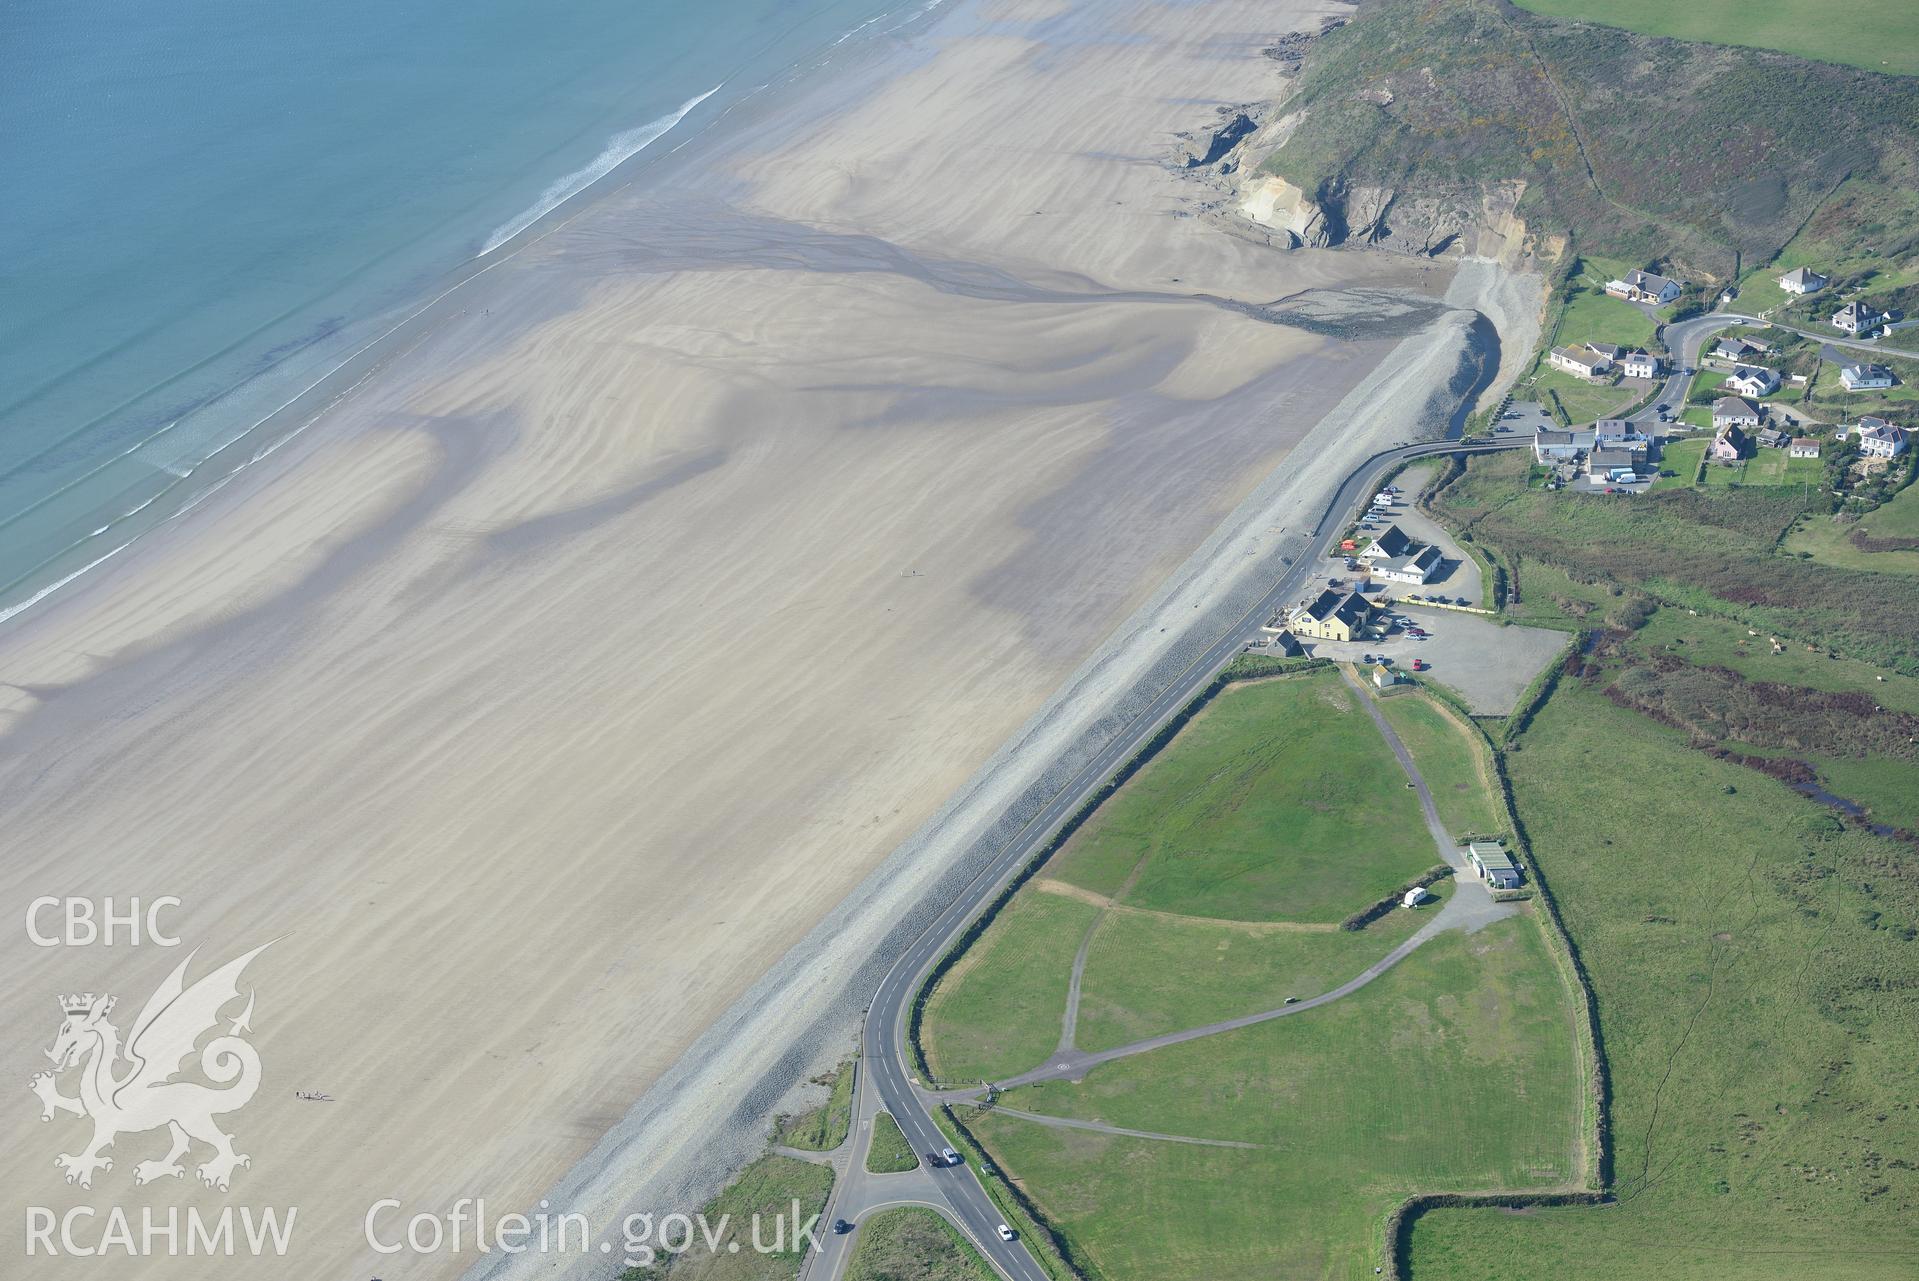 Newgale village and Newgale sands, north west of Haverford West. Oblique aerial photograph taken during the Royal Commission's programme of archaeological aerial reconnaissance by Toby Driver on 30th September 2015.